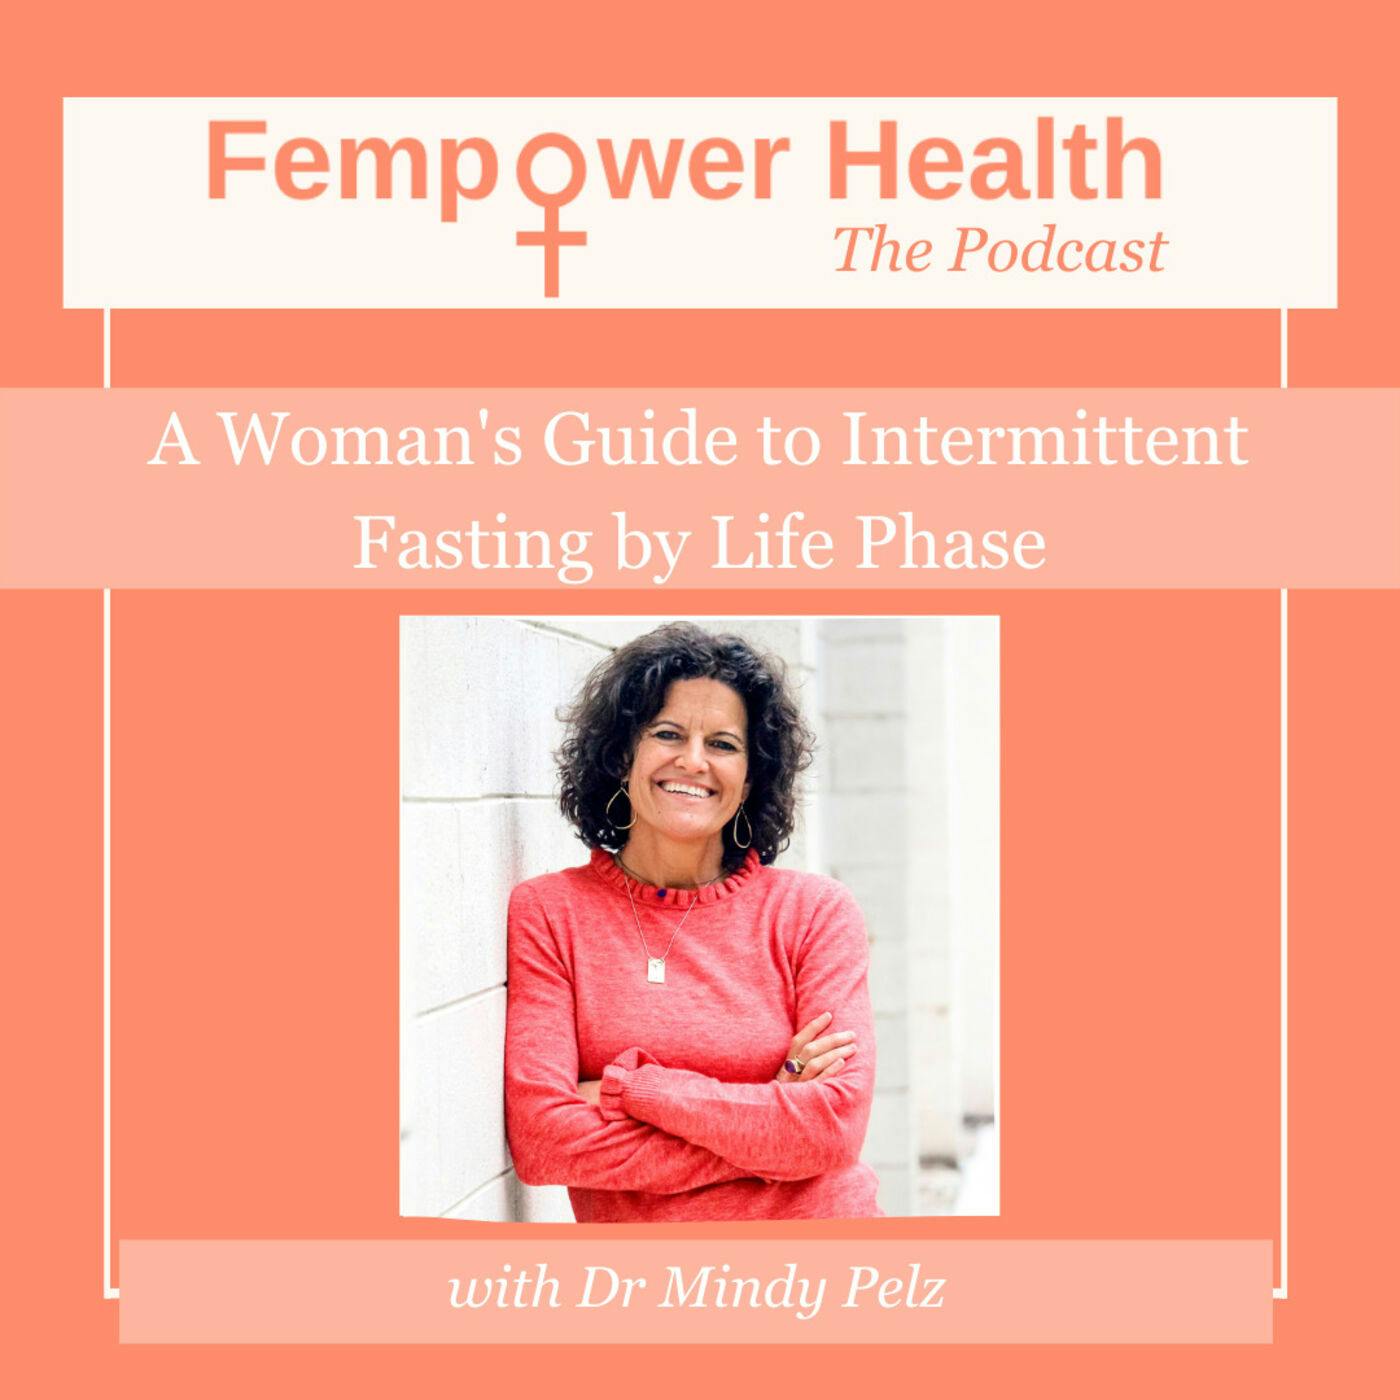 LISTEN AGAIN: A Woman's Guide to Intermittent Fasting by Life Phase | Dr. Mindy Pelz